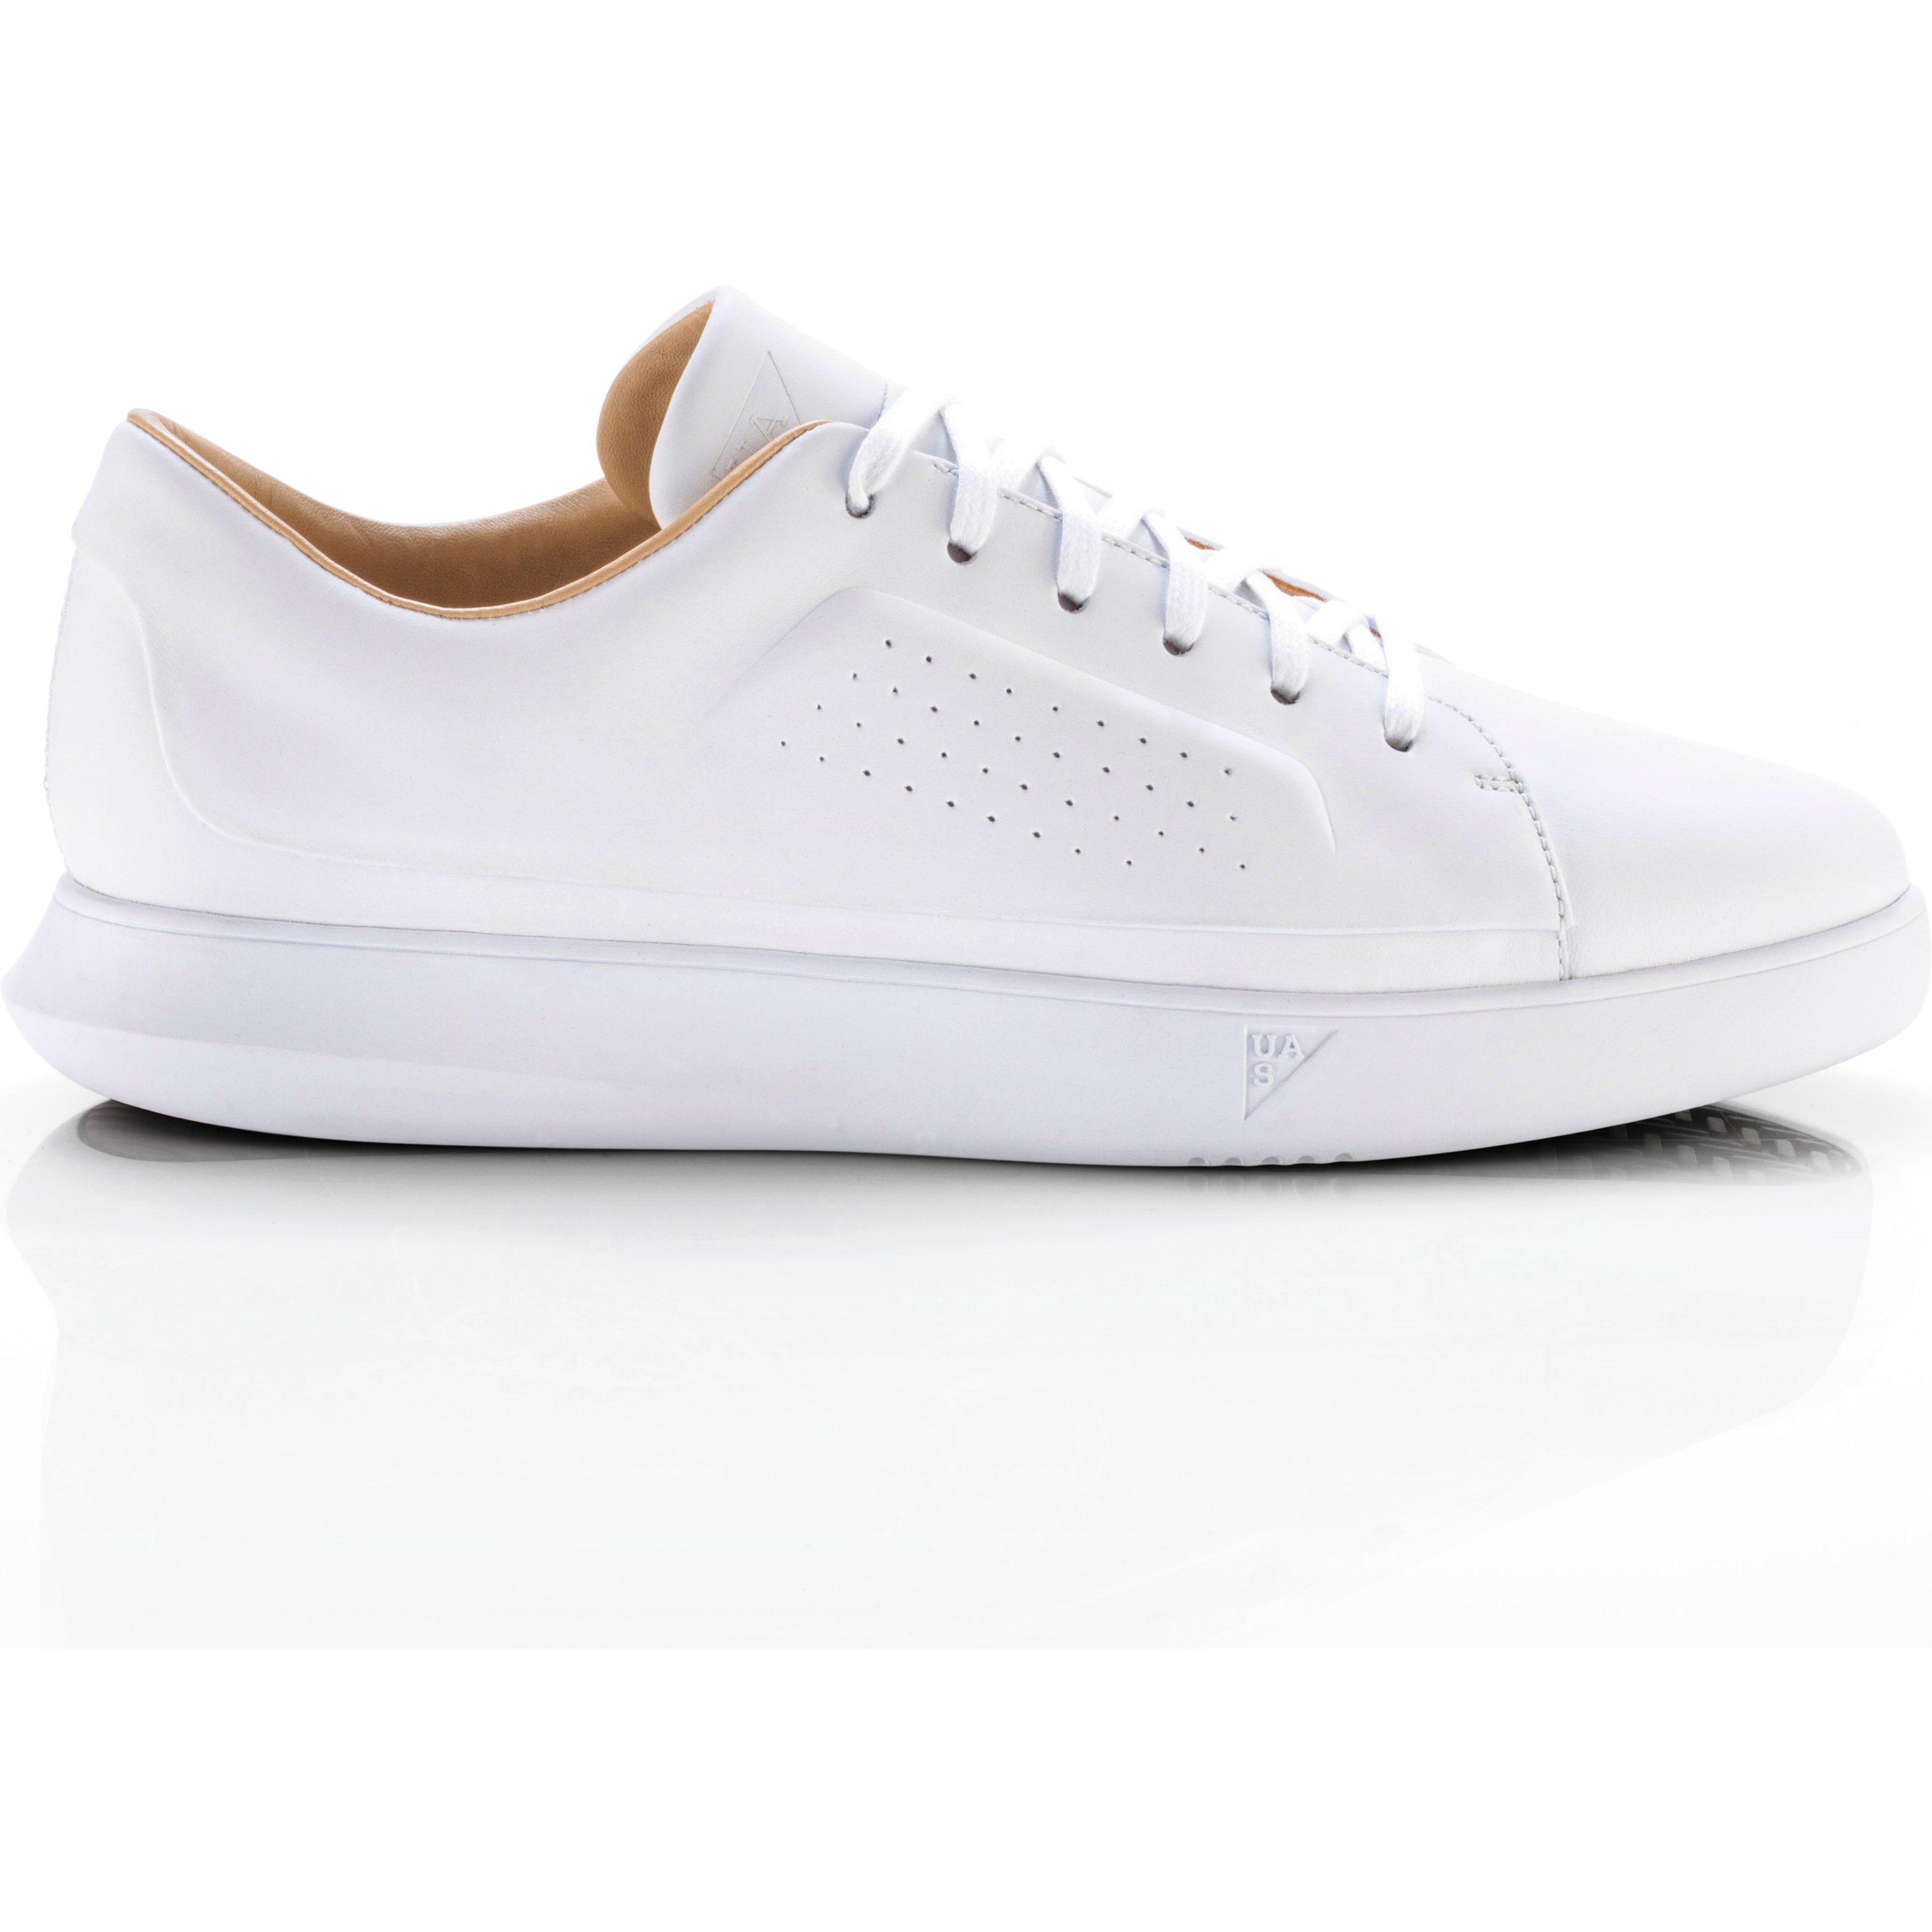 under armour white leather shoes